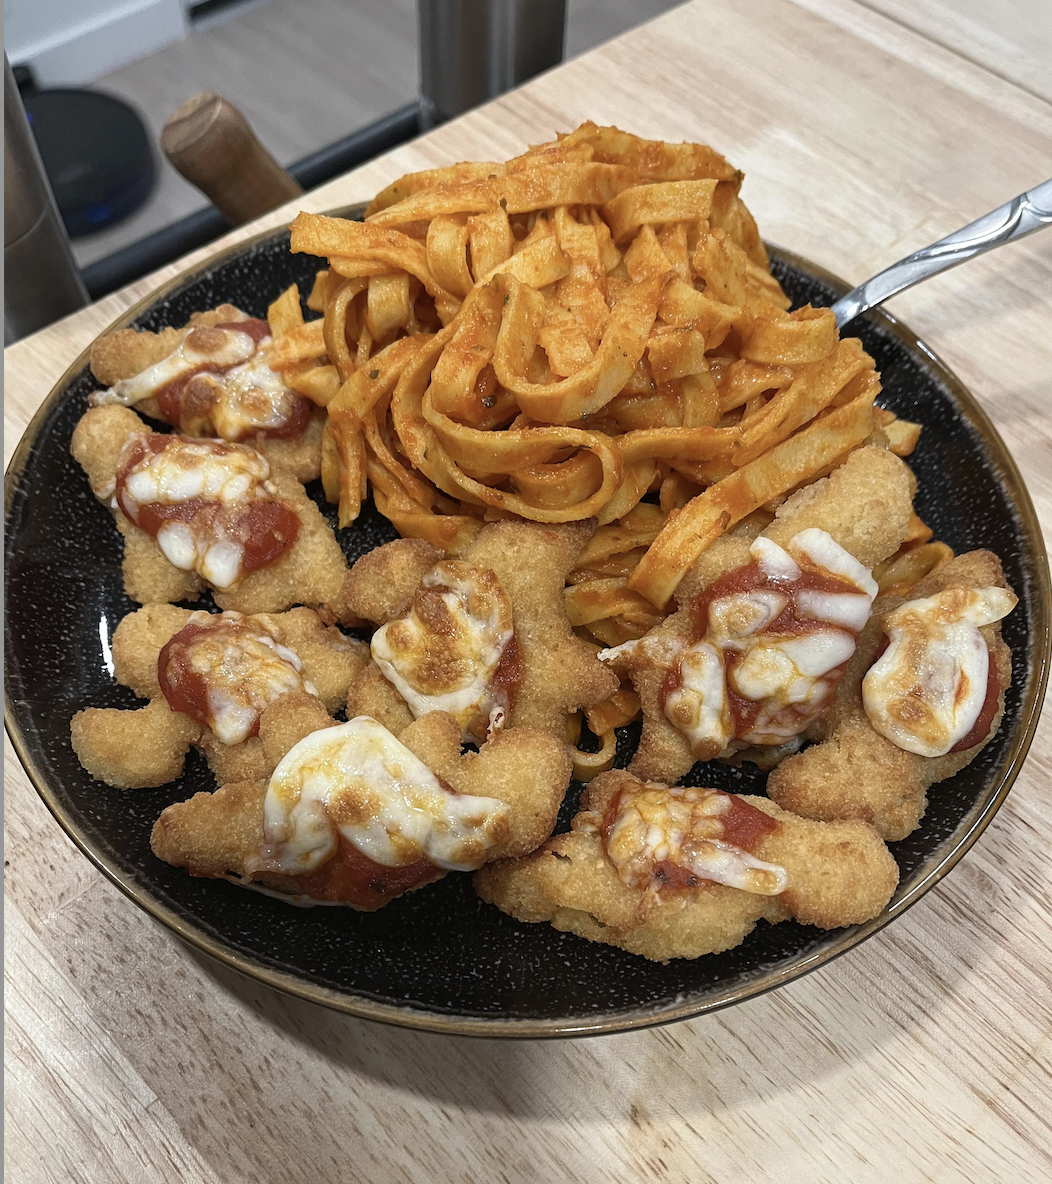 A plate of chicken nuggets with sauce and a side of waffle fries